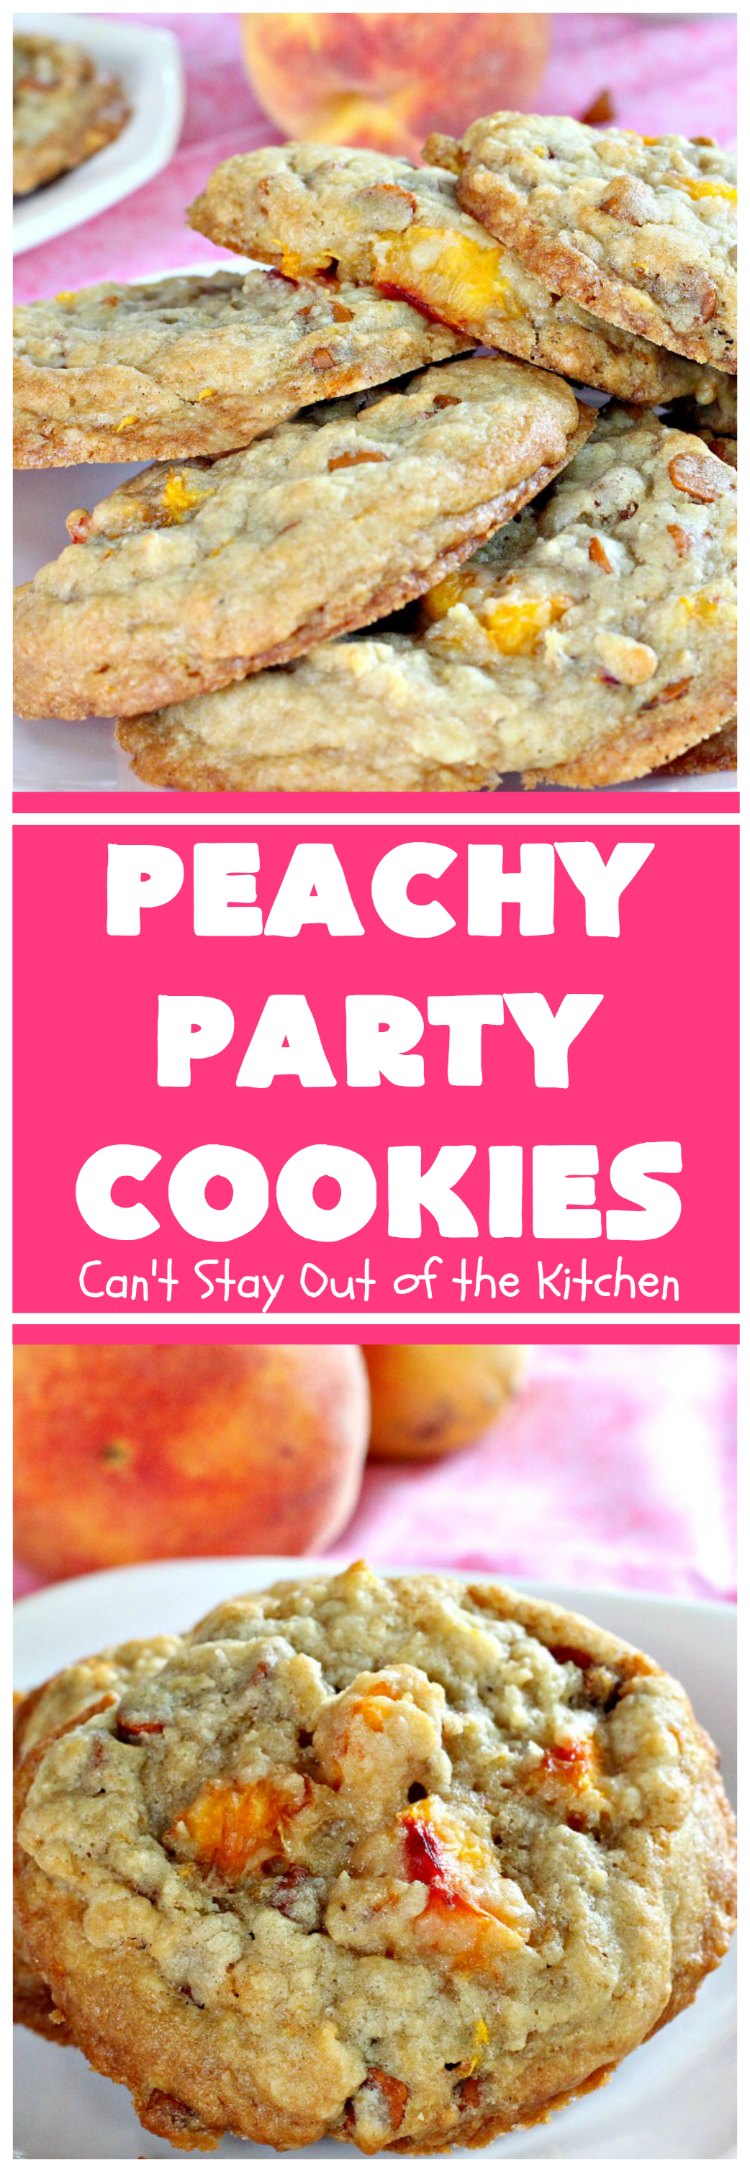 Peachy Party Cookies | Can't Stay Out of the Kitchen | these fantastic #peach #cookies will have you in the partying mood after one bite! They're scrumptious & include #cinnamon chips in the batter. Soooo good. #dessert #peachdessert